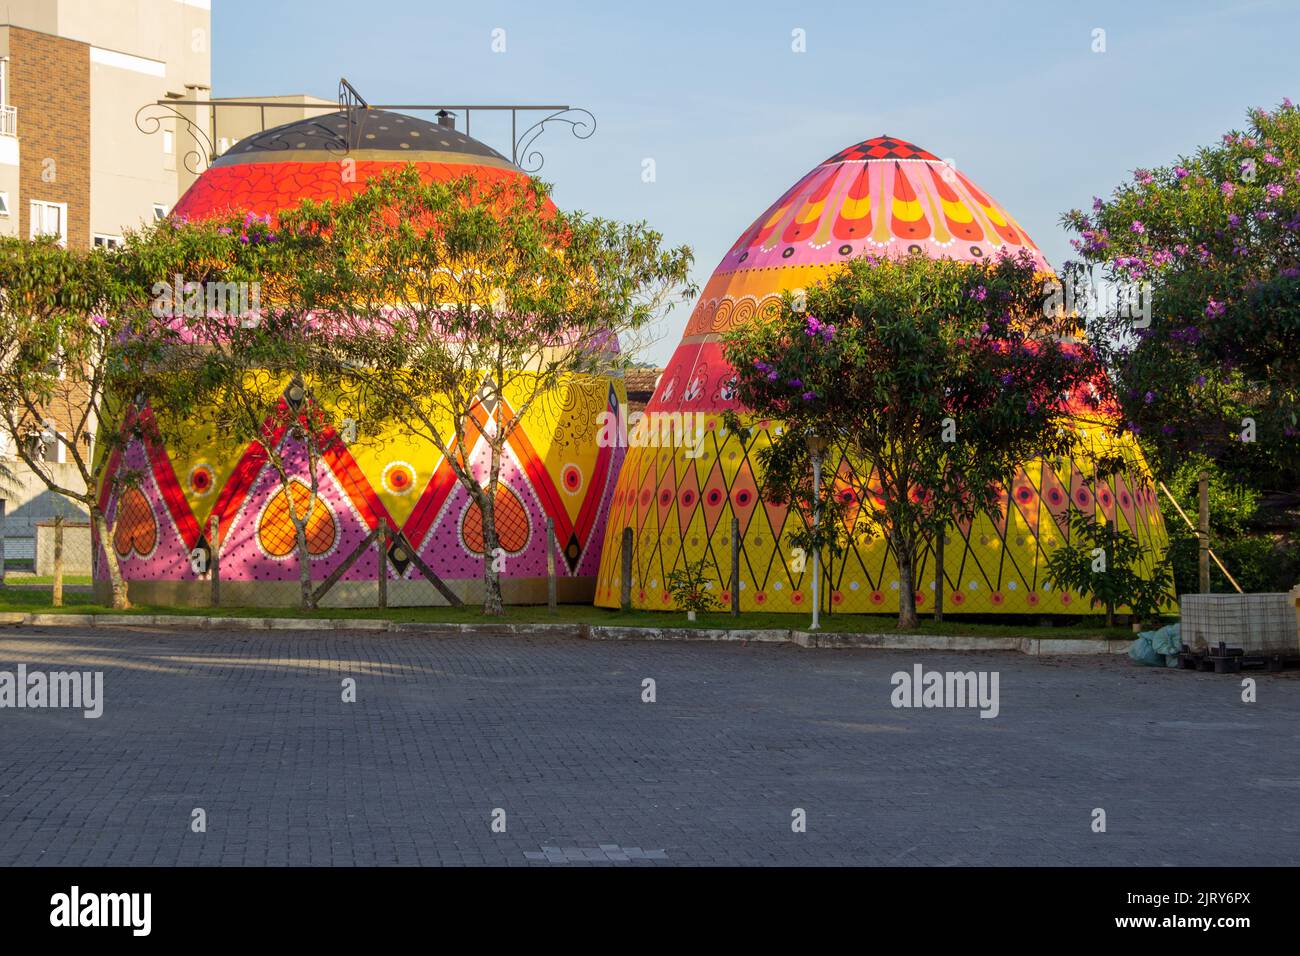 Giant egg in celebration of Pomerode pastime in Santa Catarina, Brazil - May 4, 2019: Pomerode once again entered Guinness World Records. The city of Stock Photo